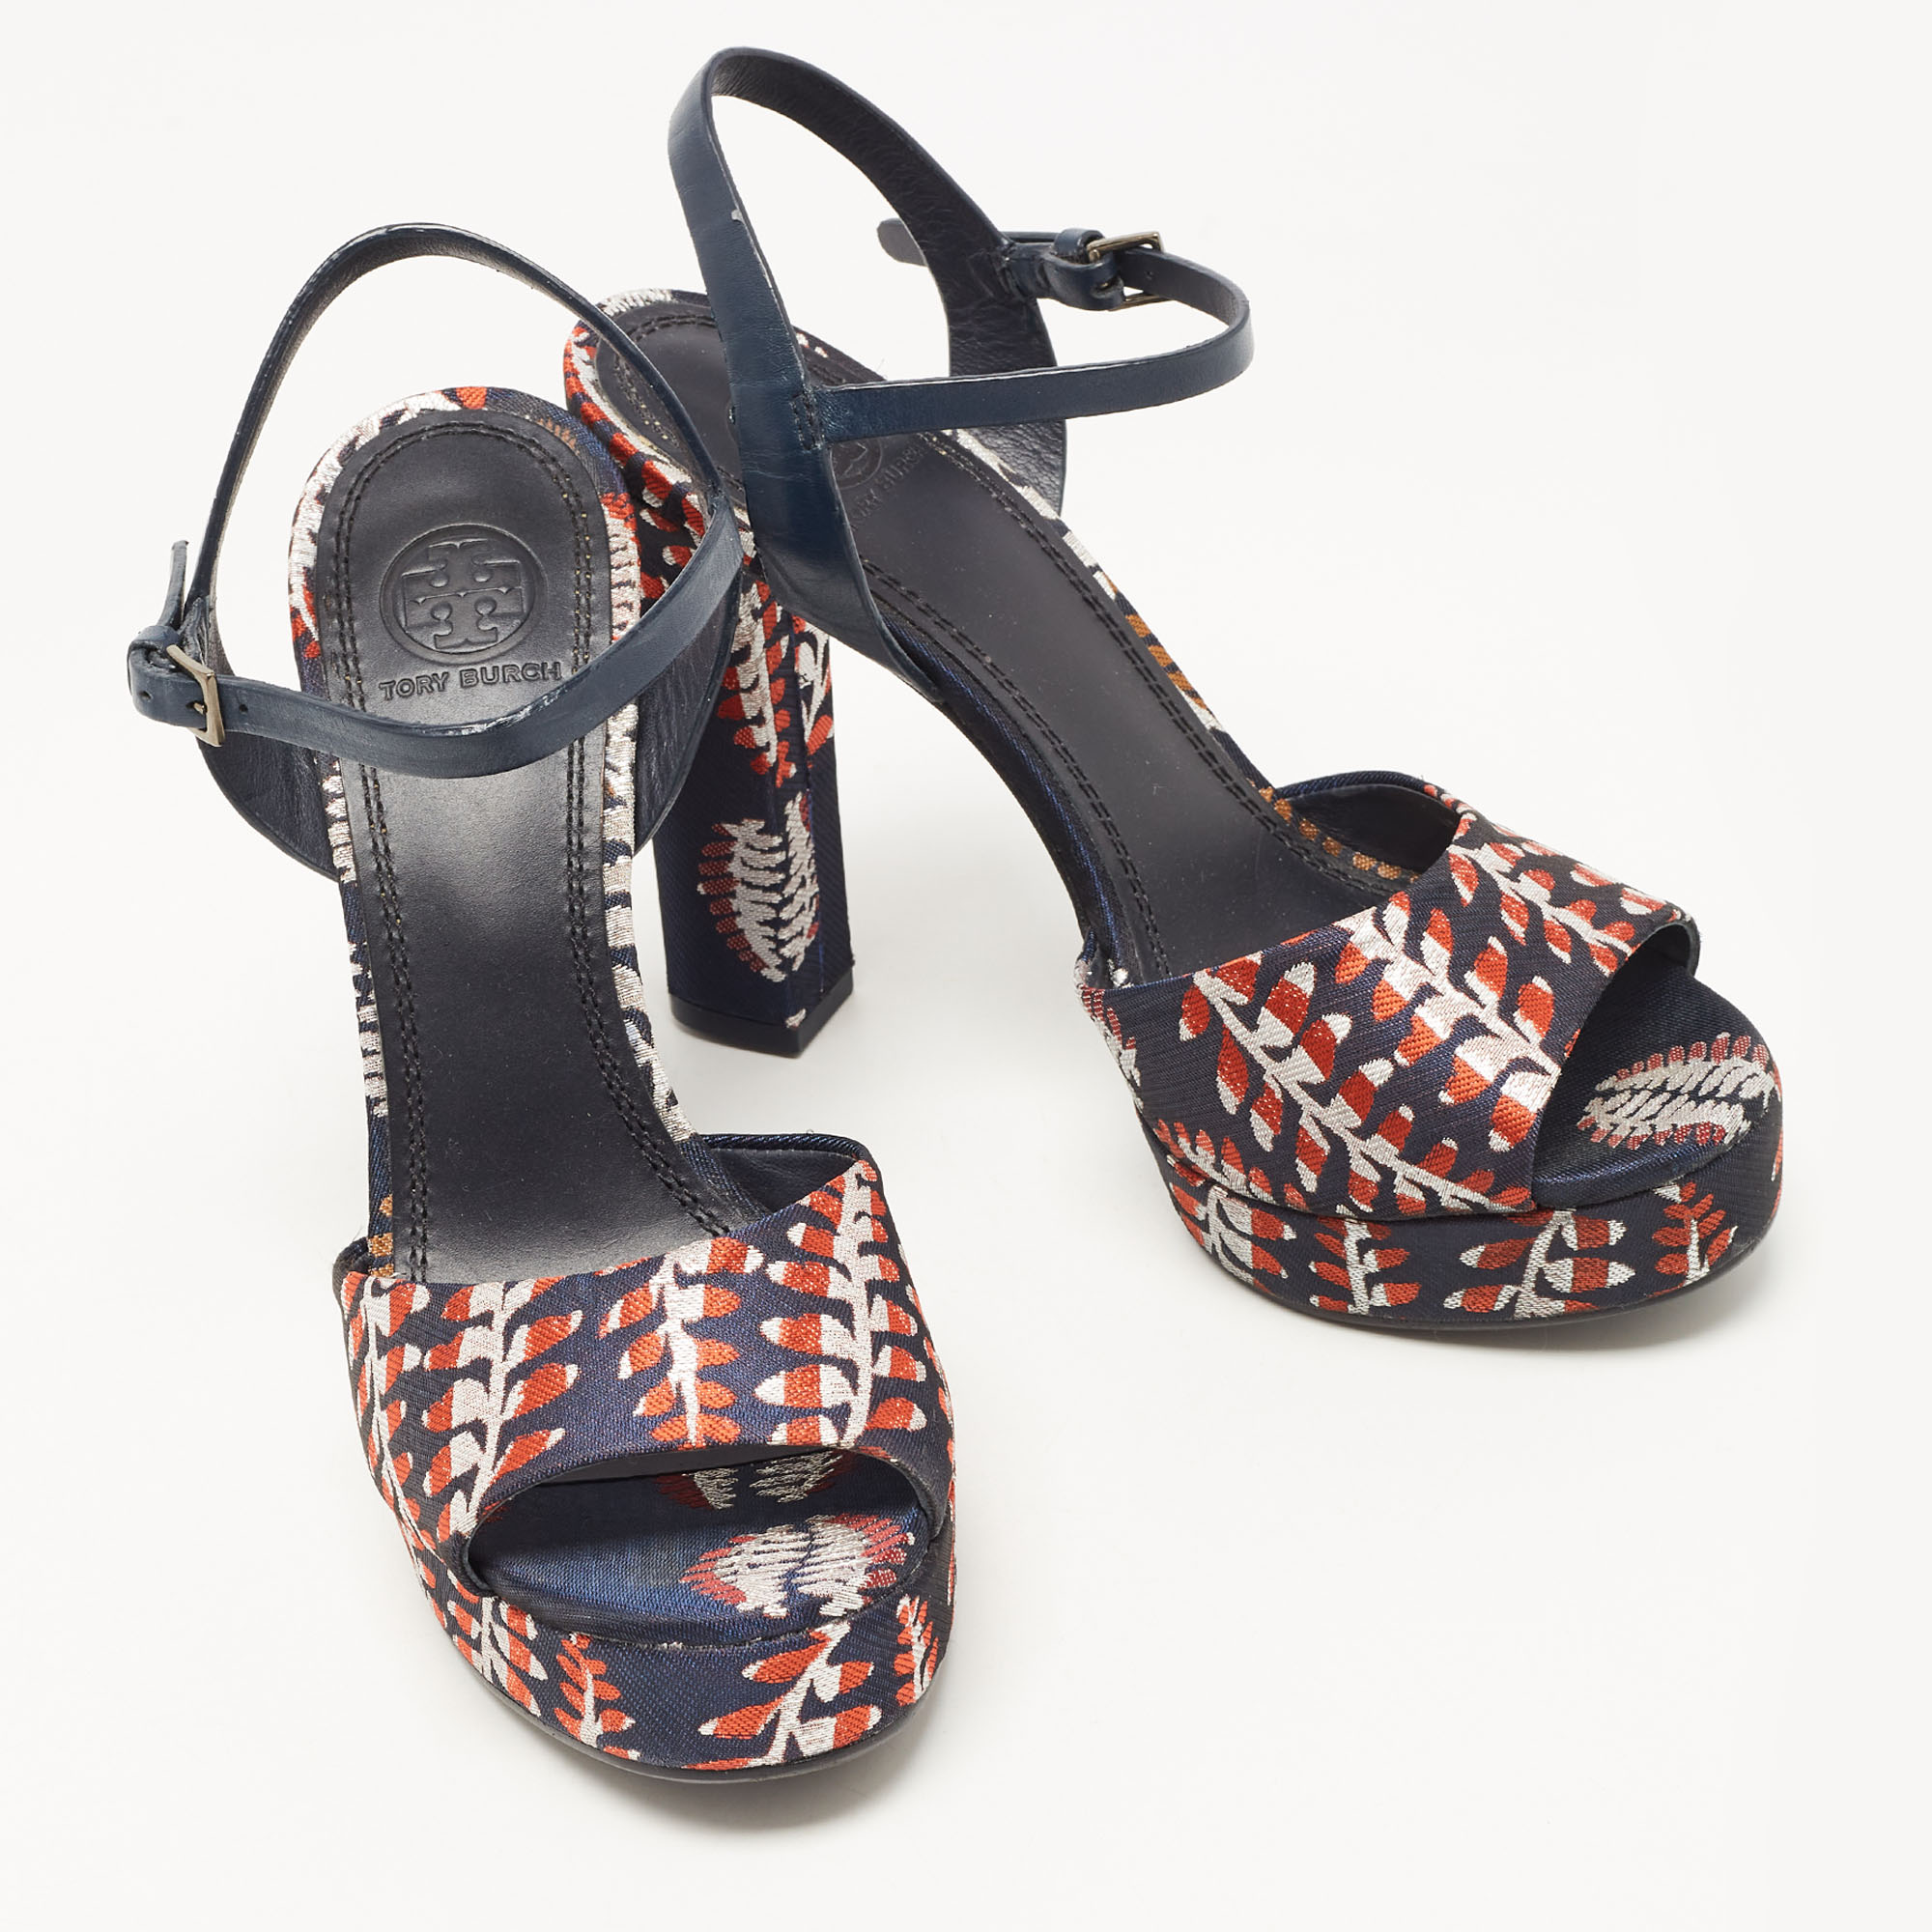 Tory Burch Navy Blue/Red Brocade Fabric Ankle Strap Sandals Size 38.5